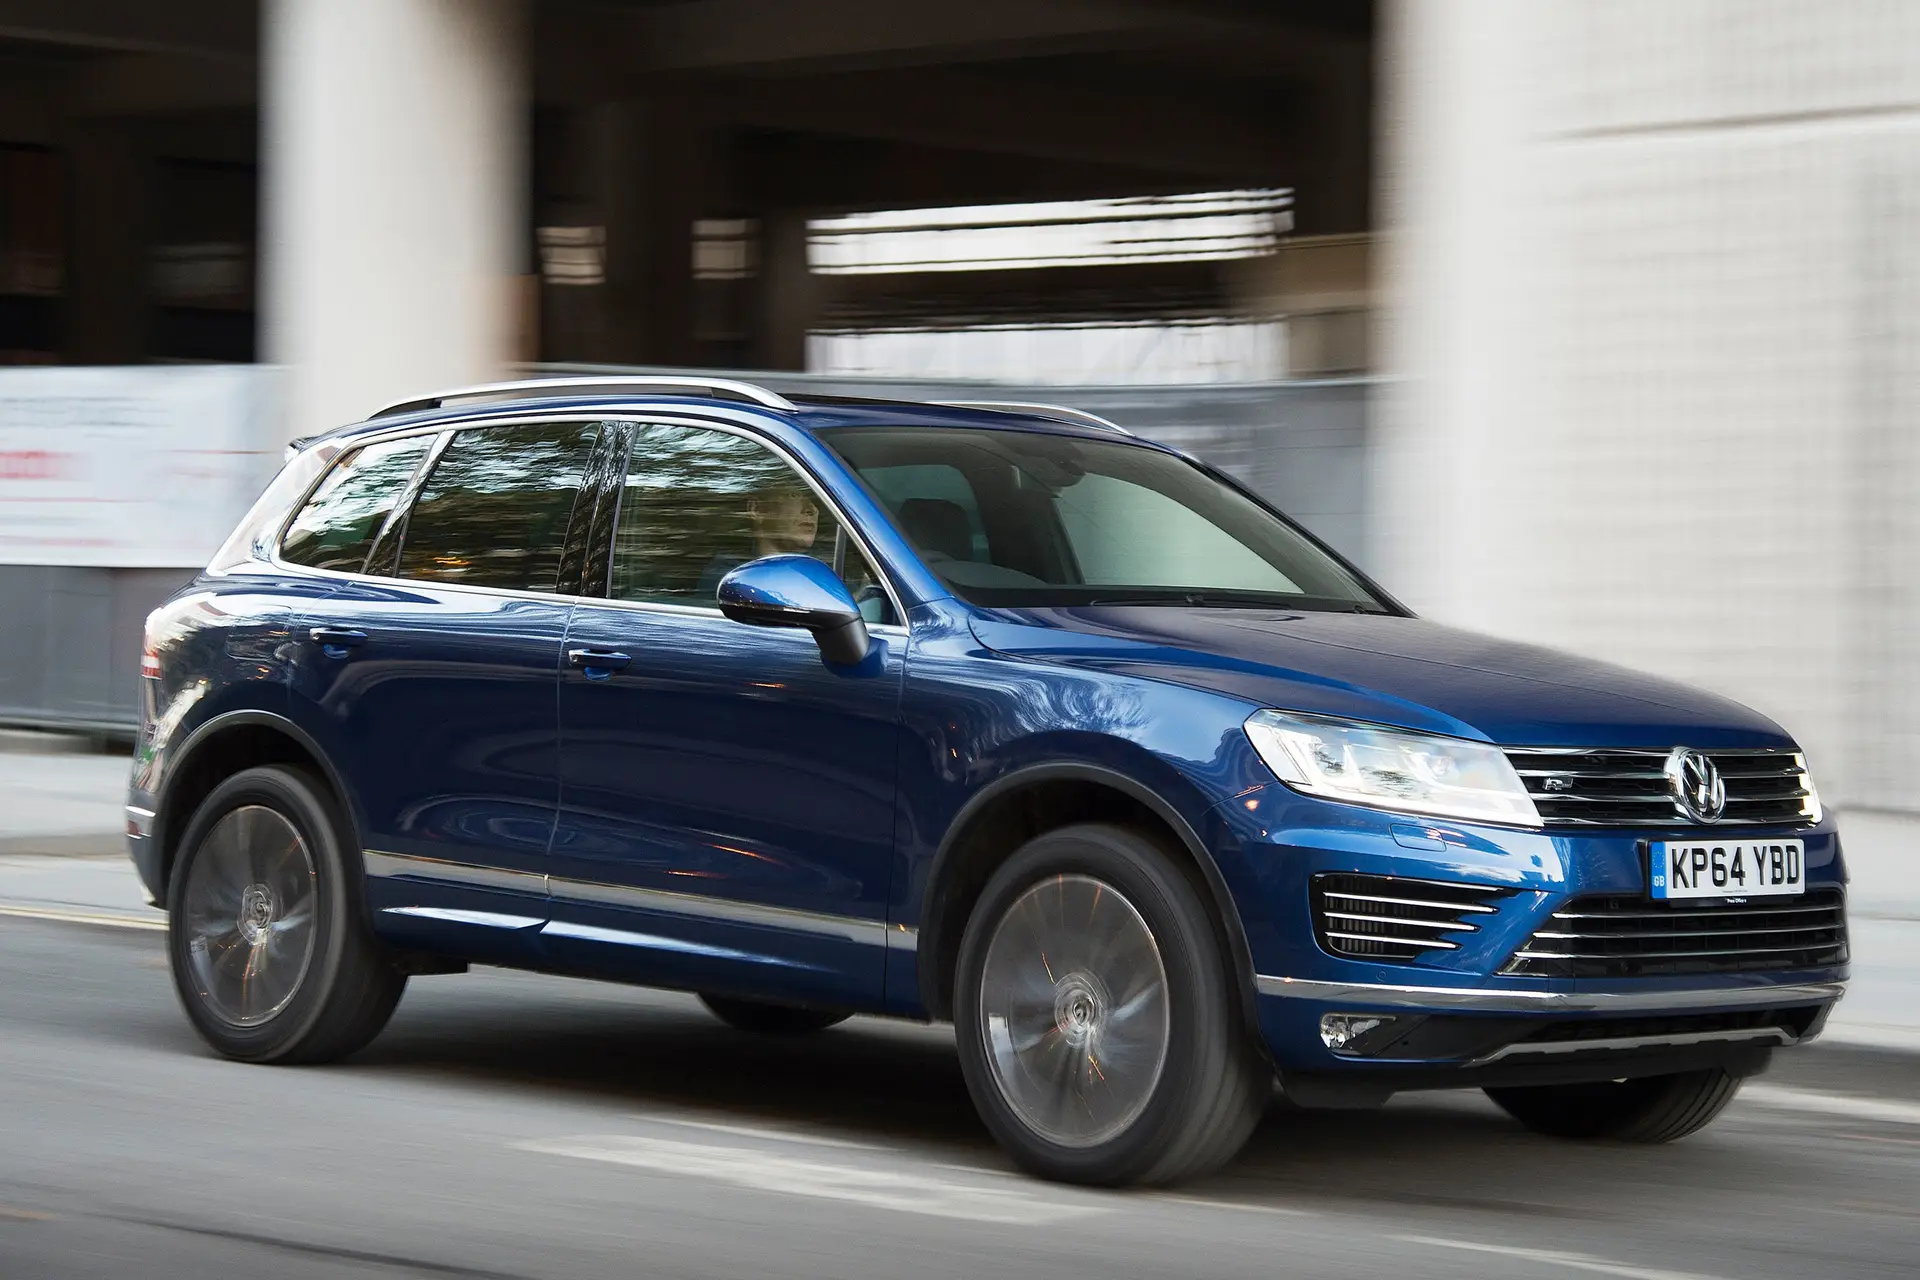  Volkswagen Touareg (2010-2018) Review: exterior front three quarter photo of the Volkswagen Touareg on the road